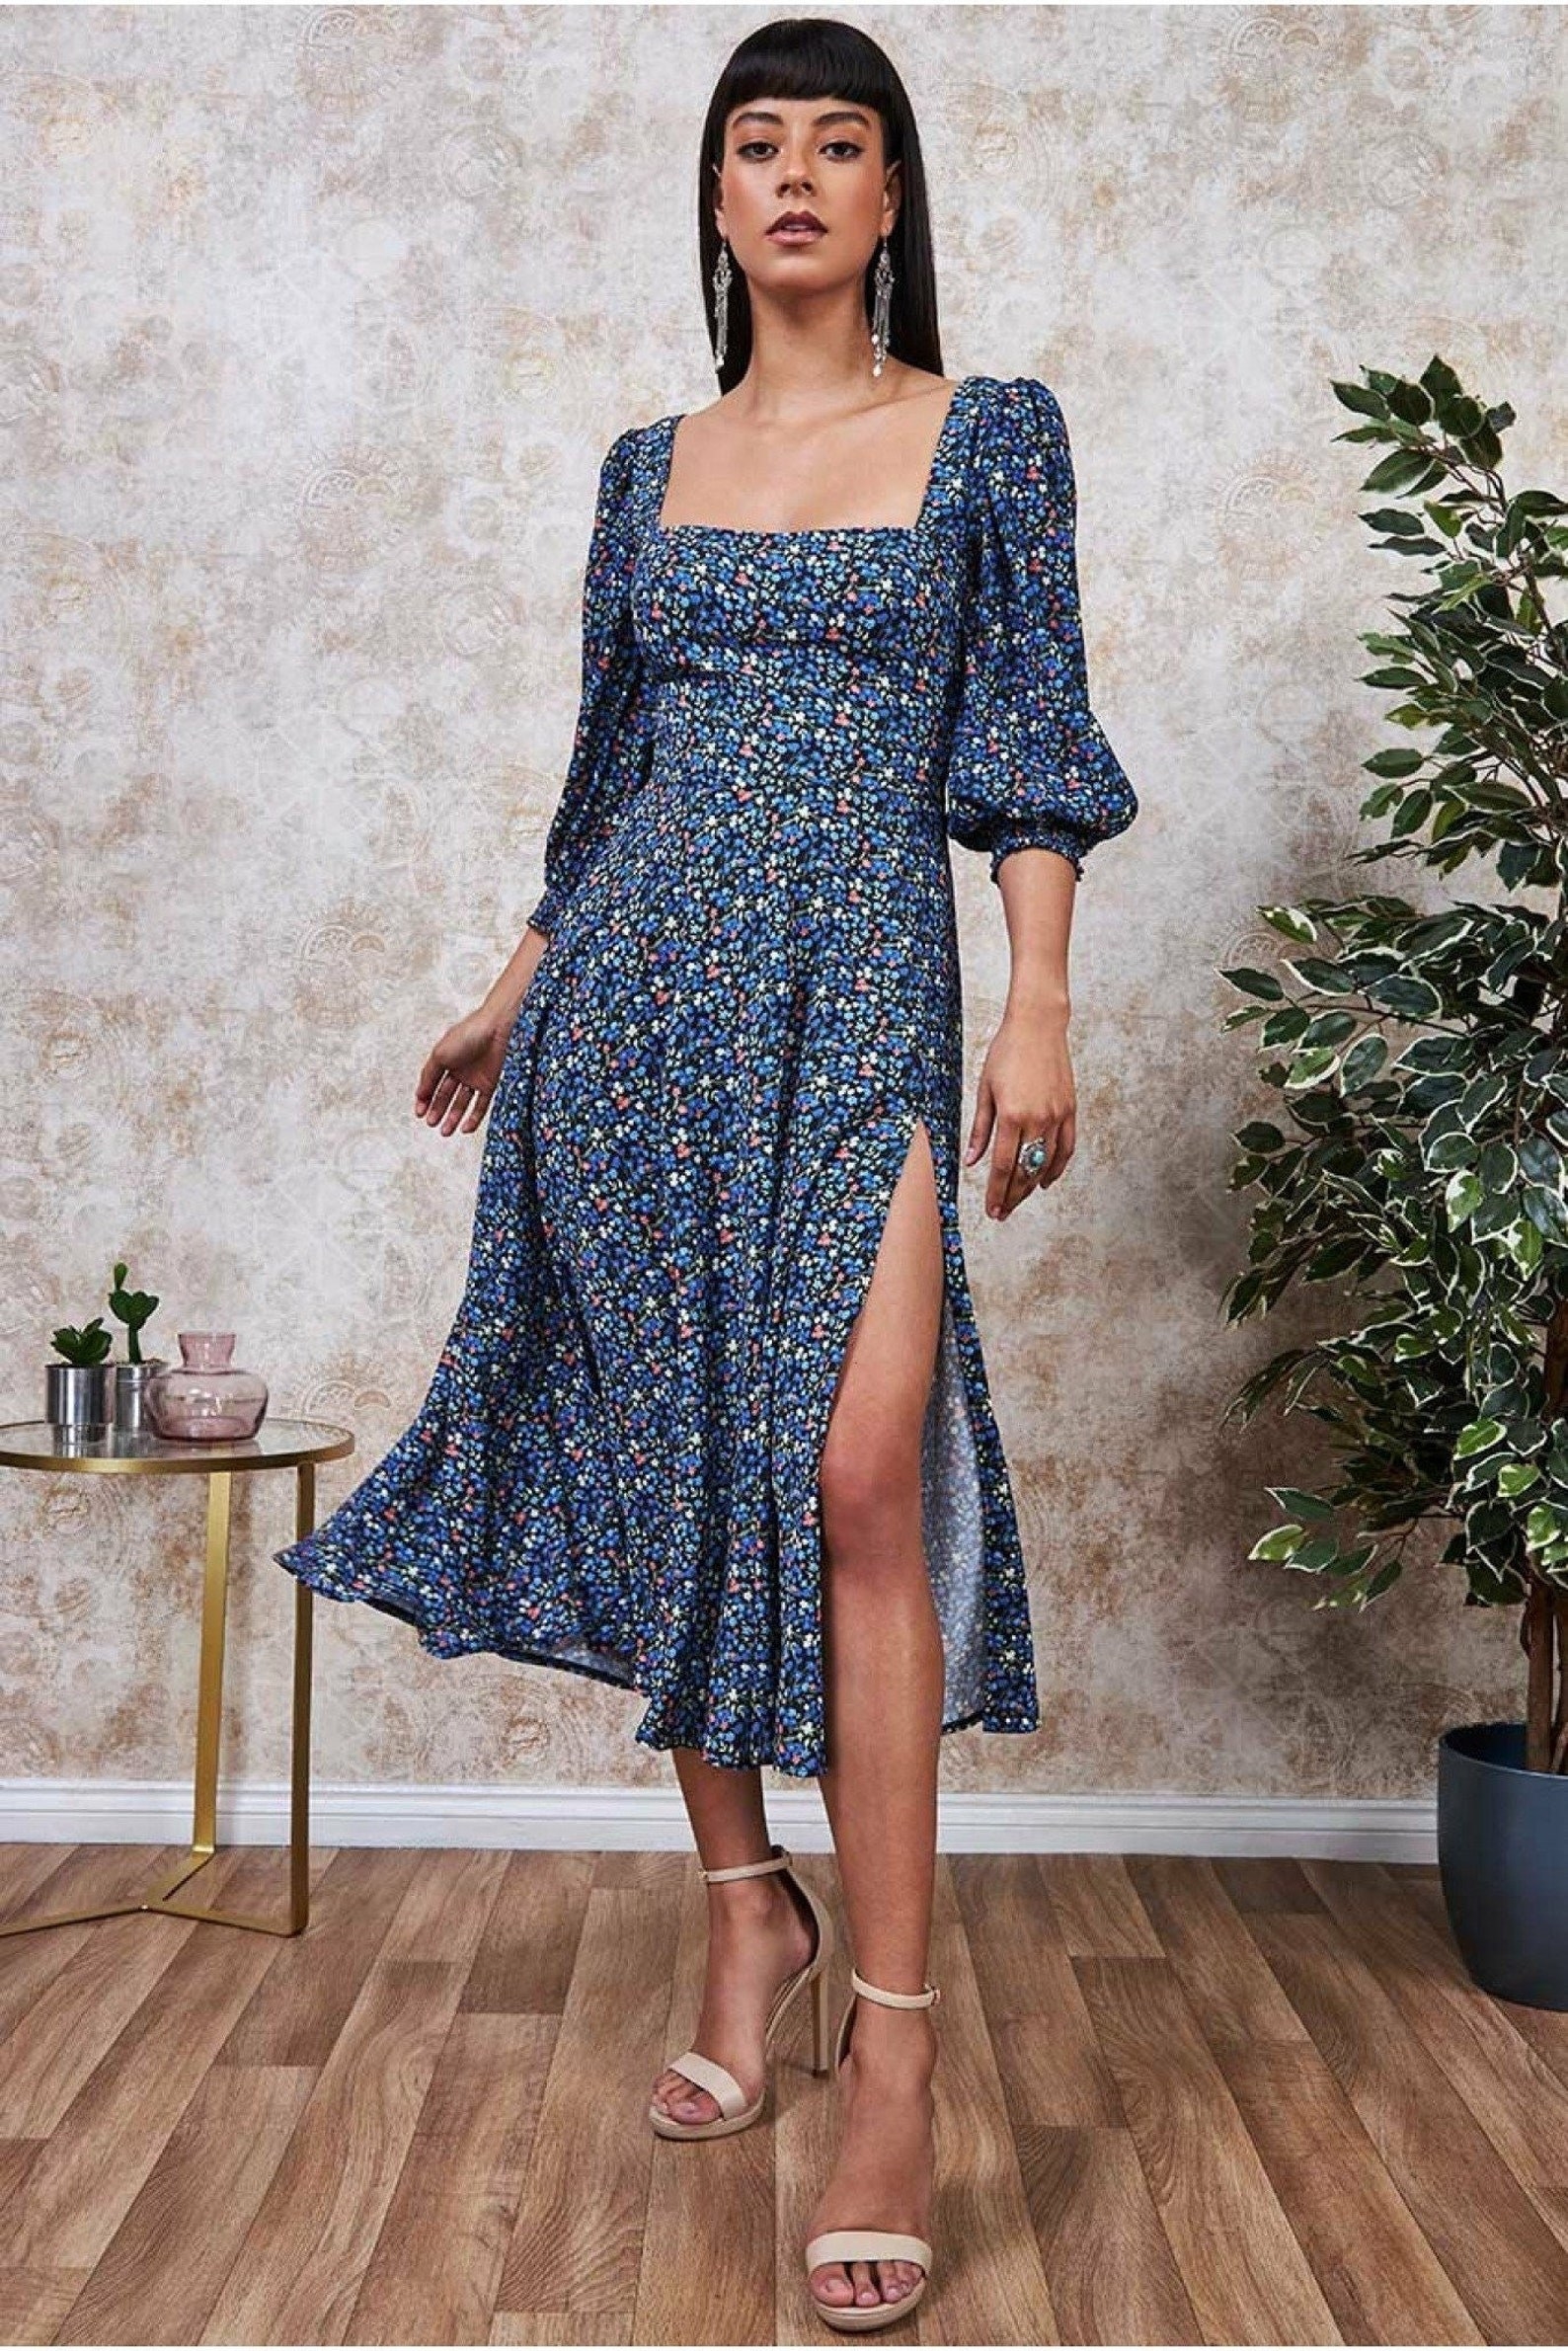 a model wearing the blue floral dress showing the puff sleeves and high slit.